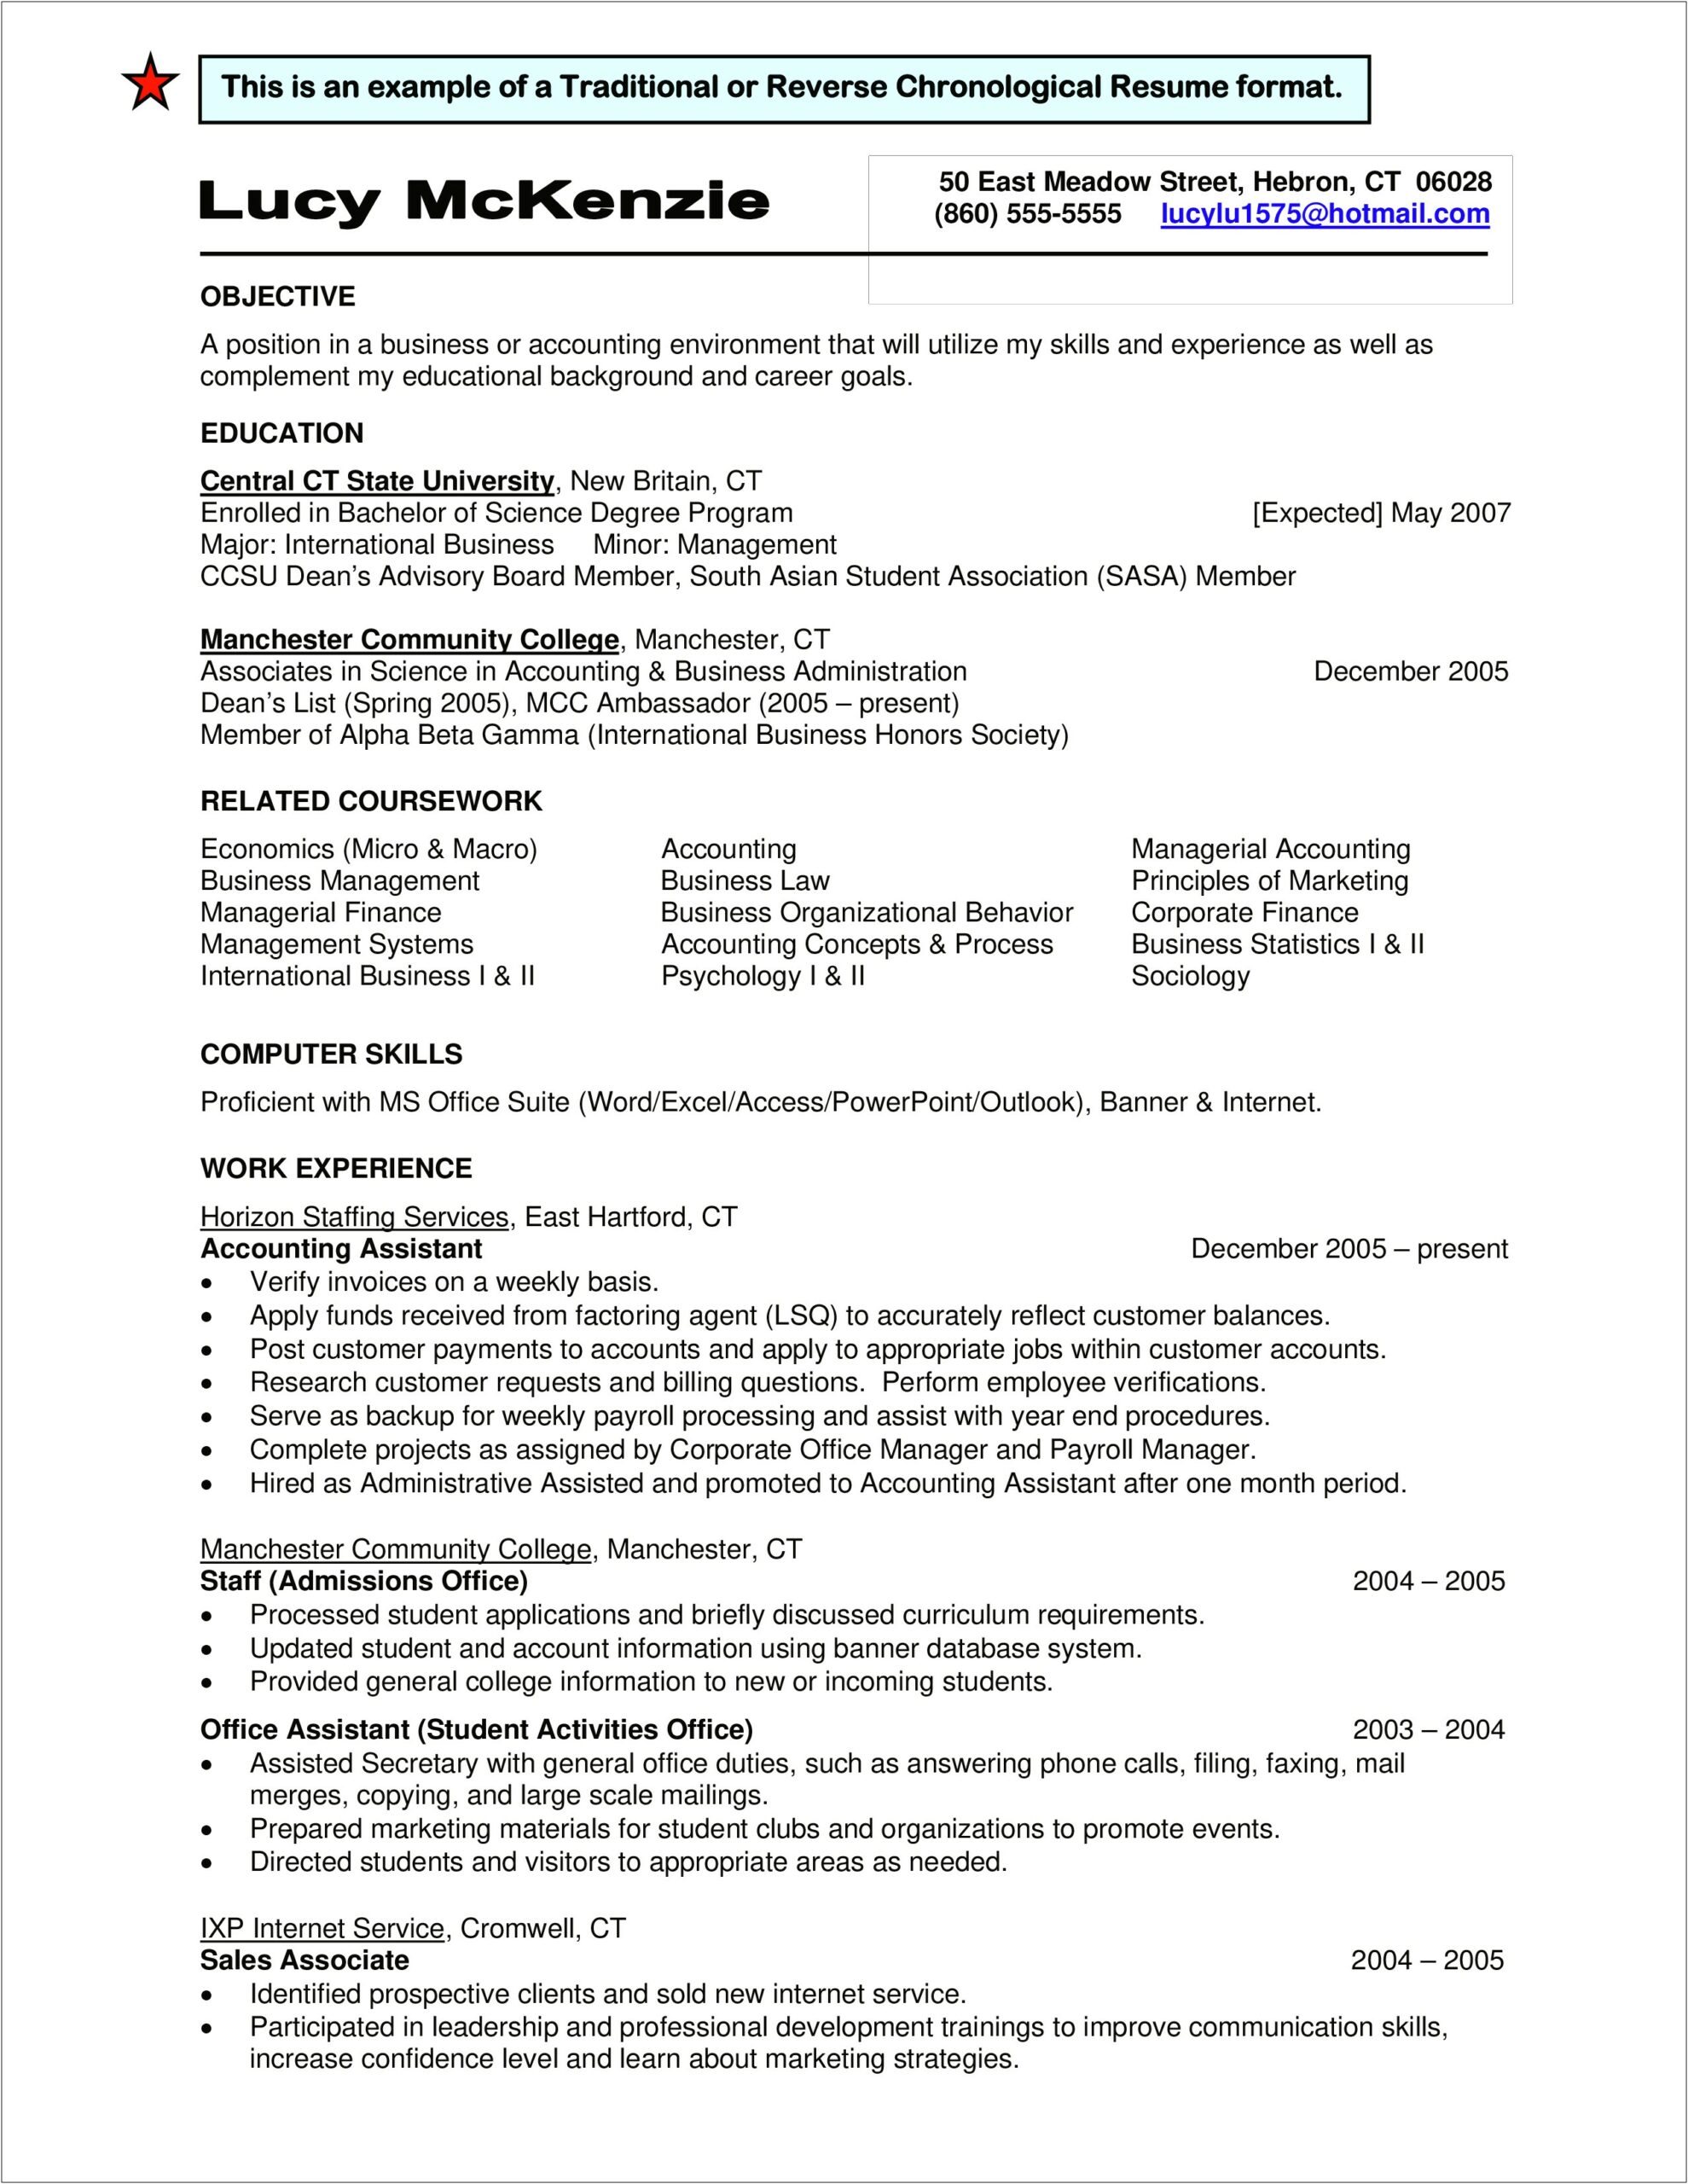 School Counseling License Listed On Resume Ct